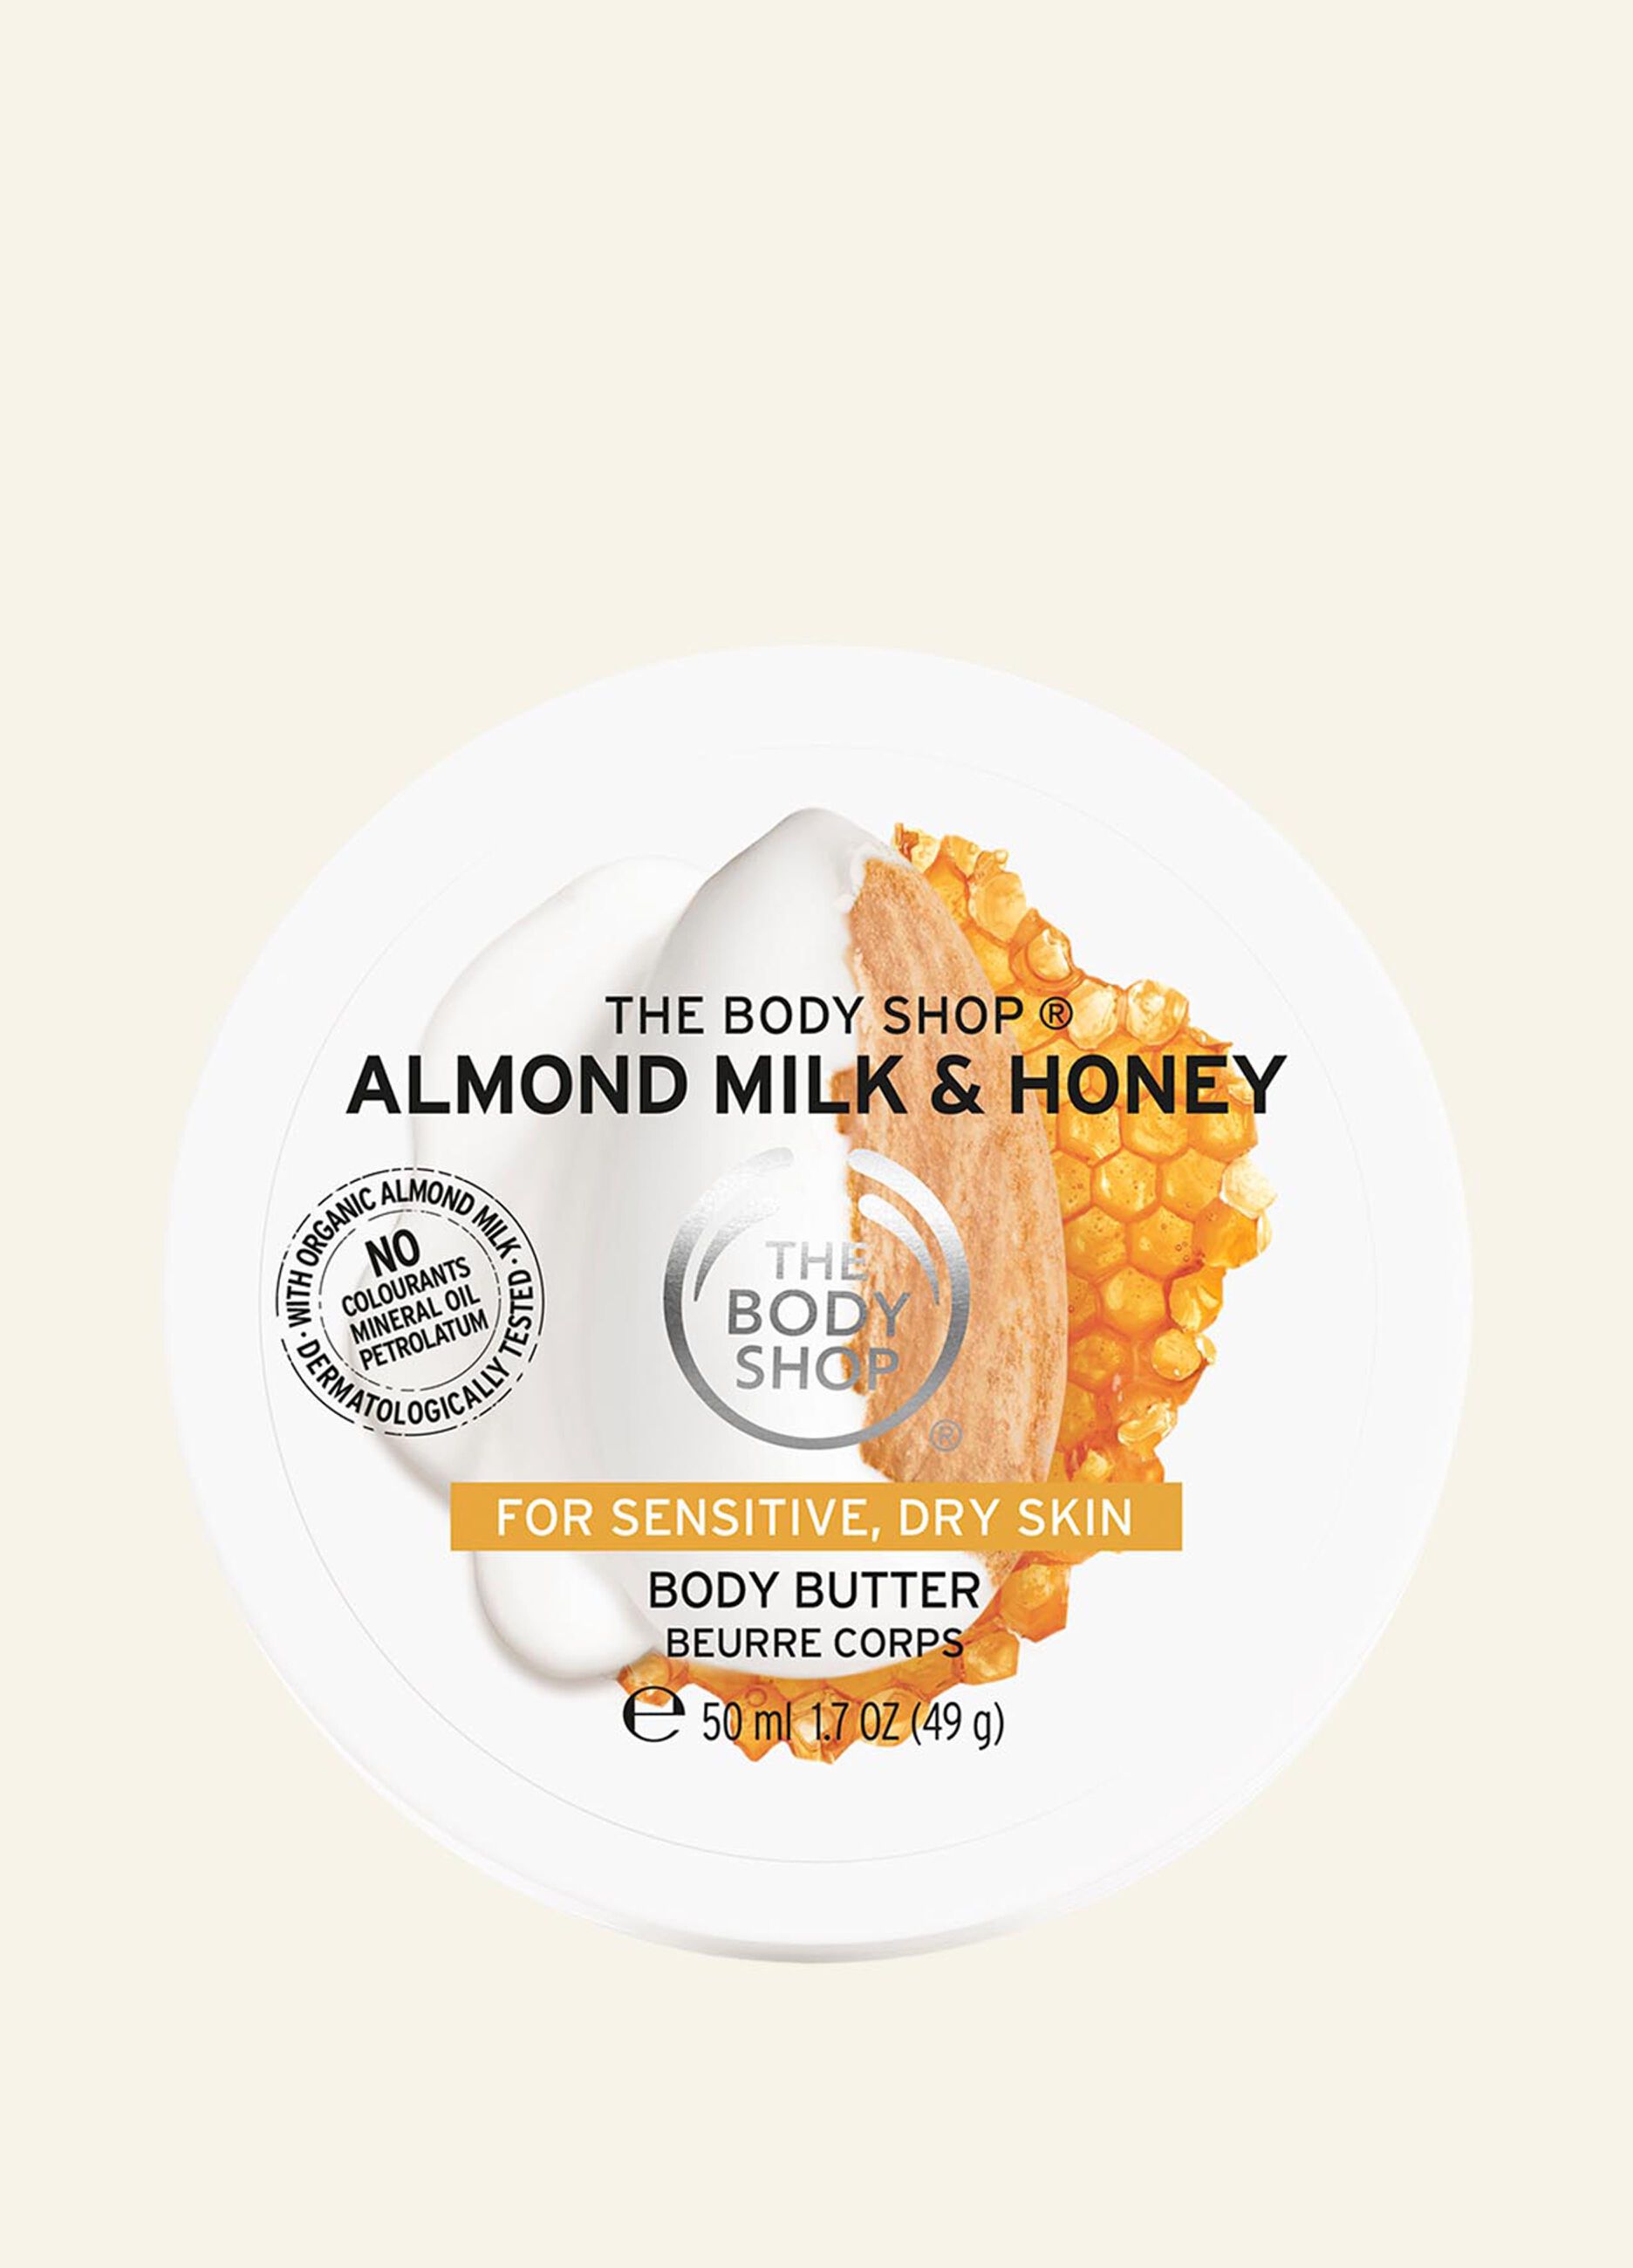 The Body Shop almond milk and honey body butter 50ml